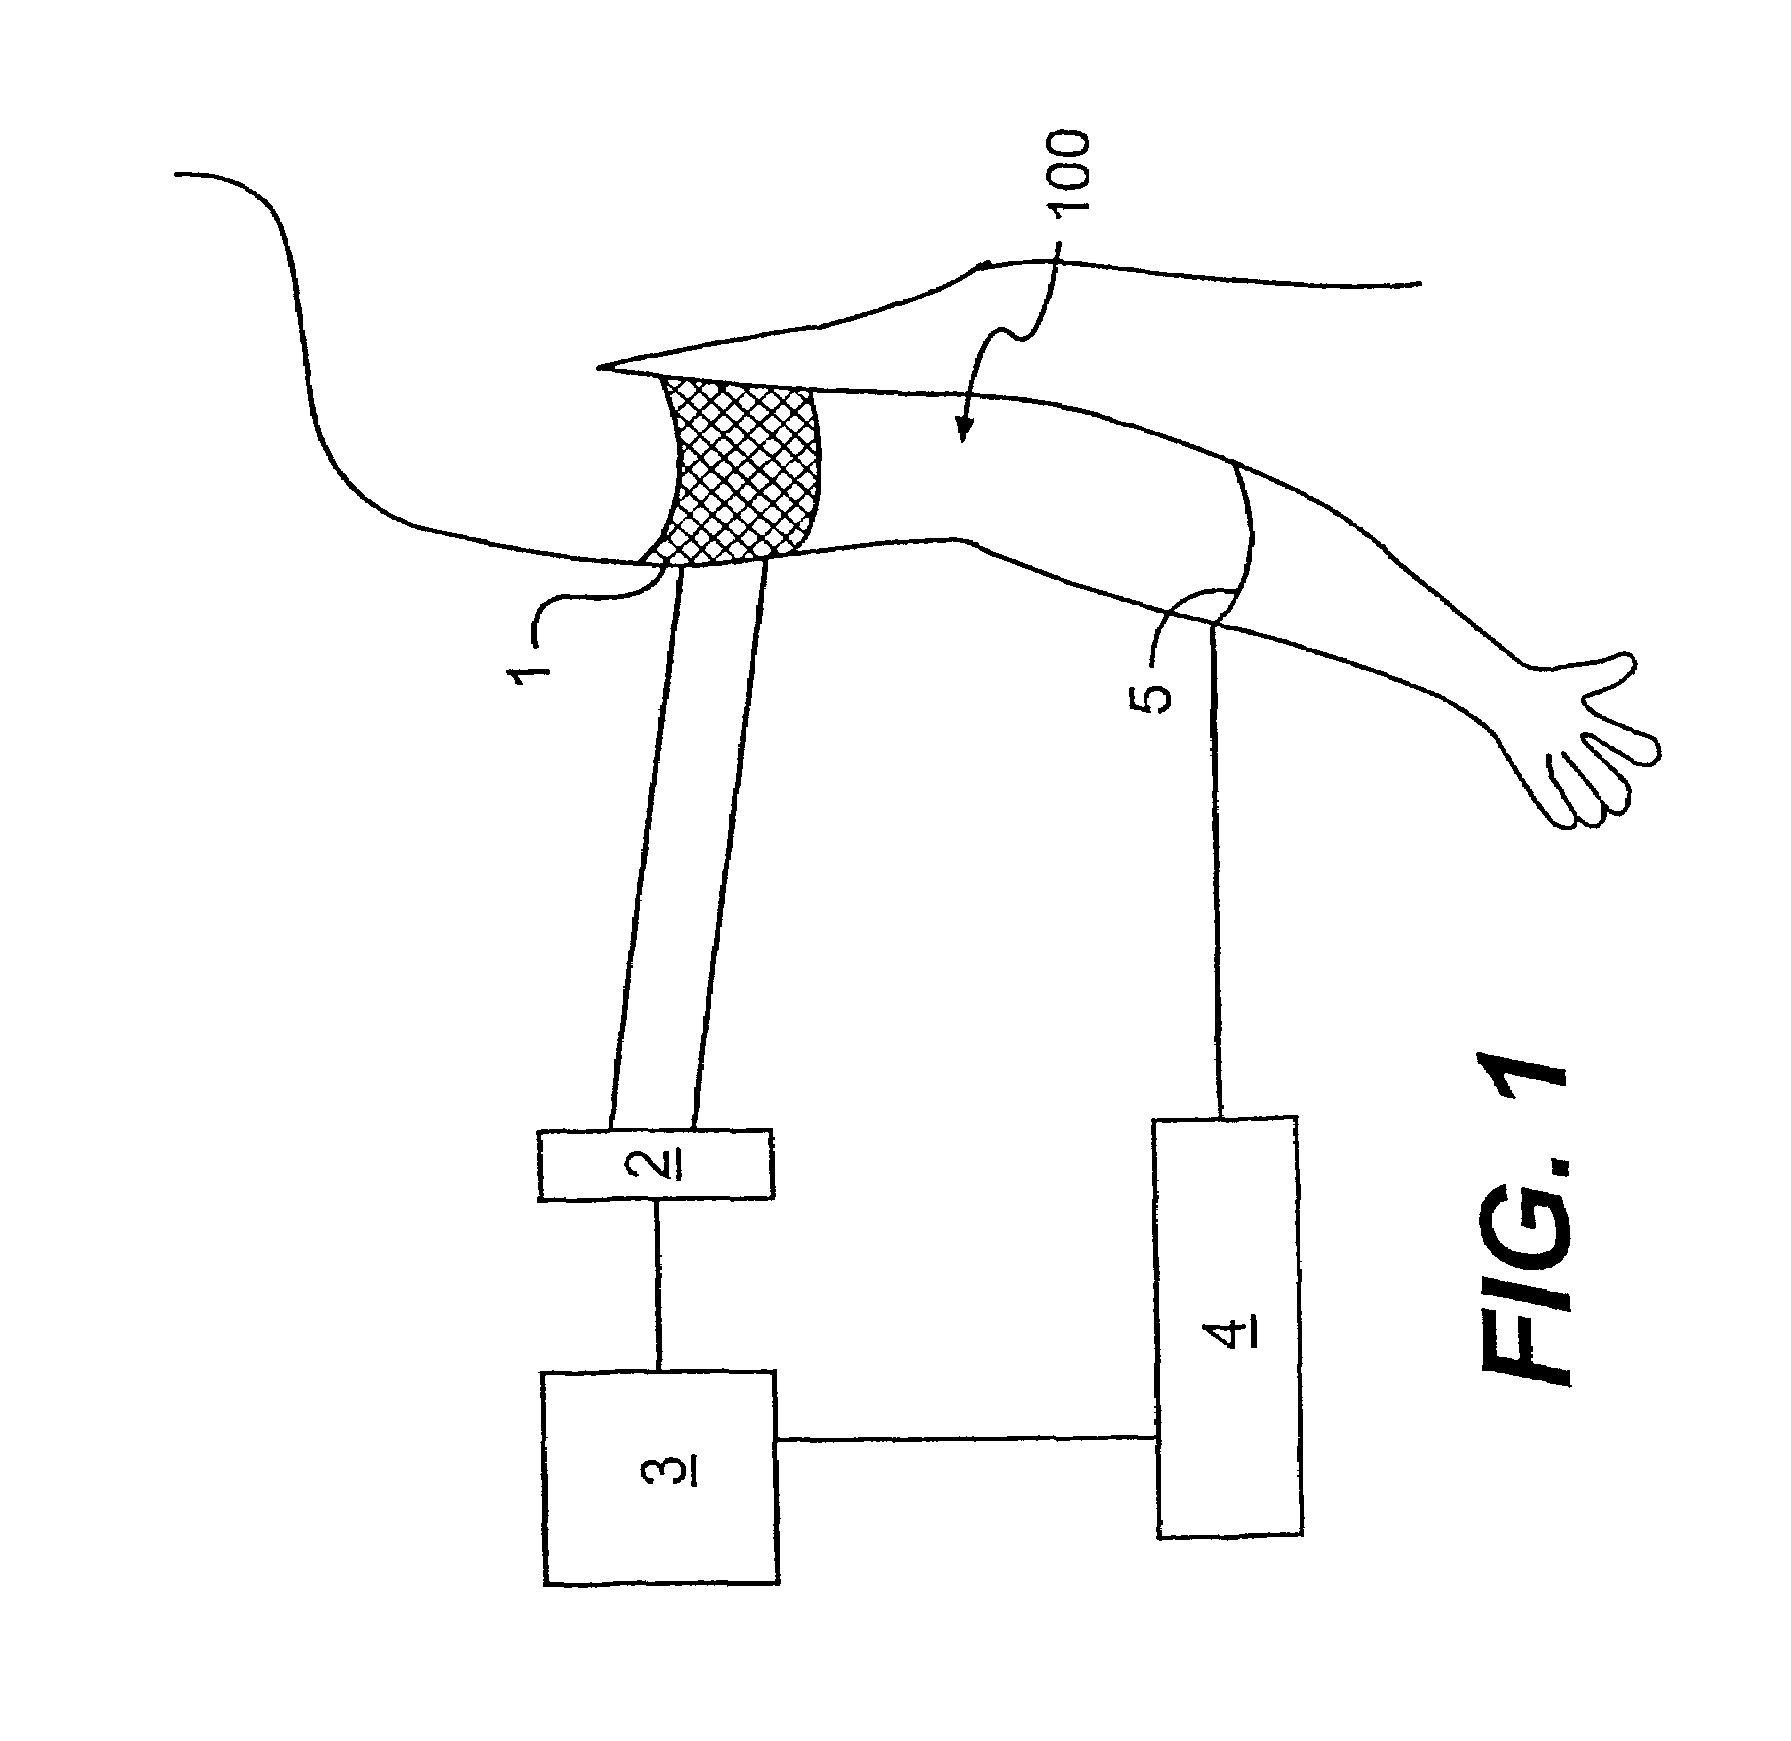 Methods for monitoring and optimizing central venous pressure and intravascular volume